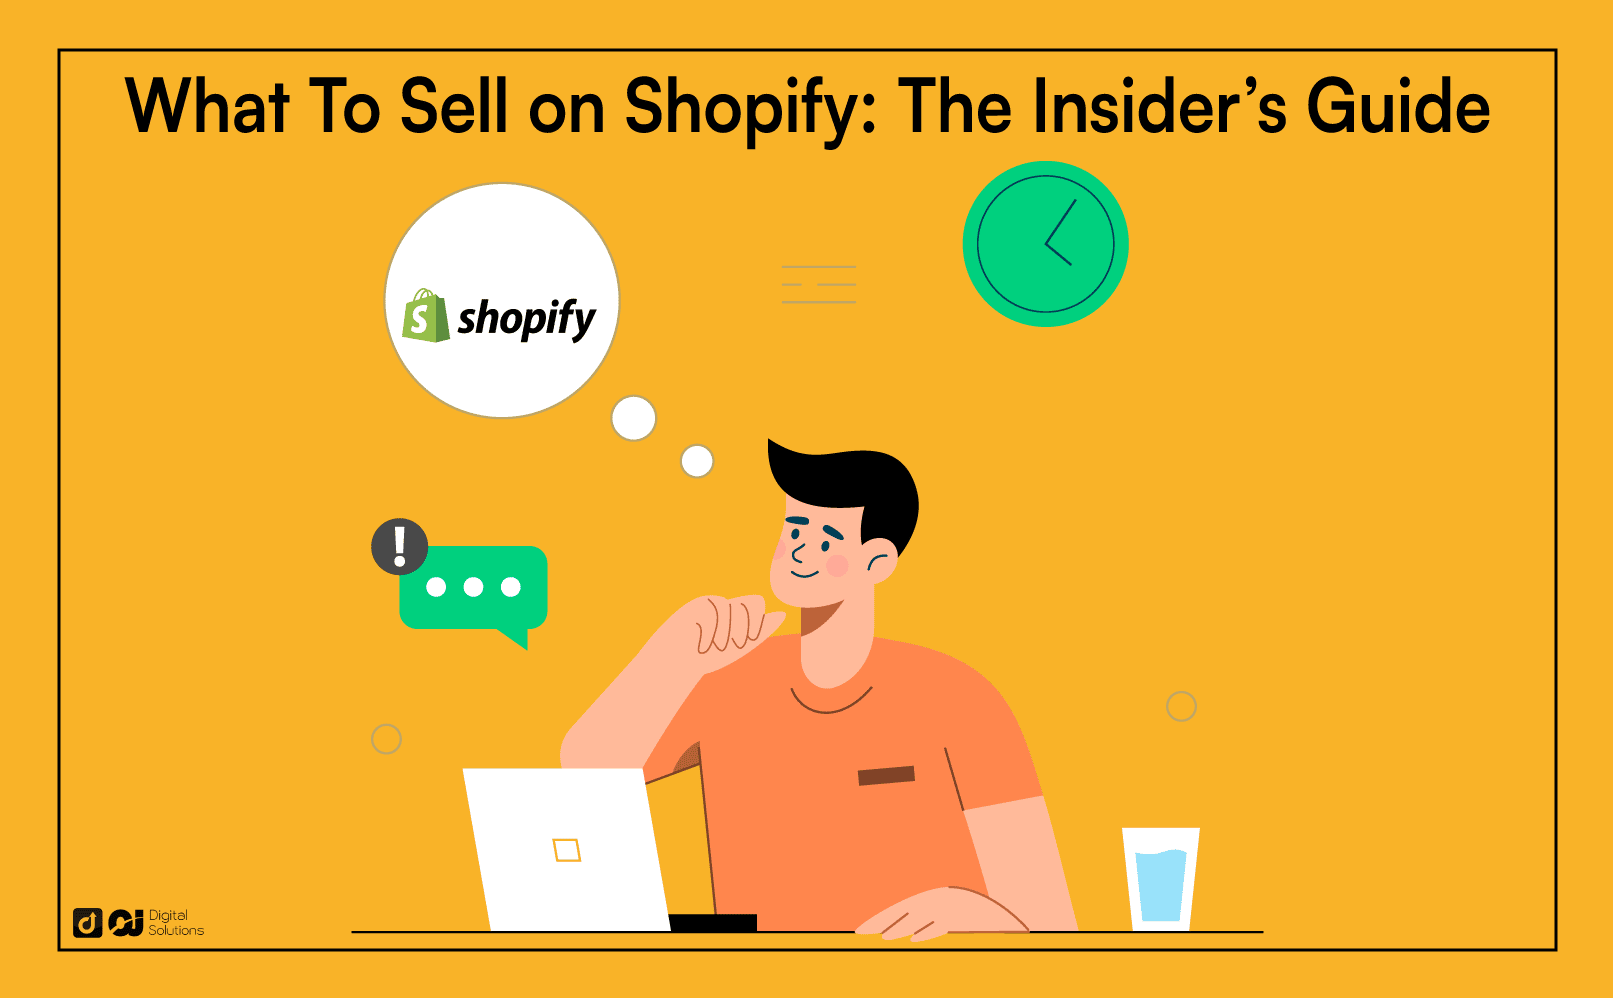 What to Sell on Shopify